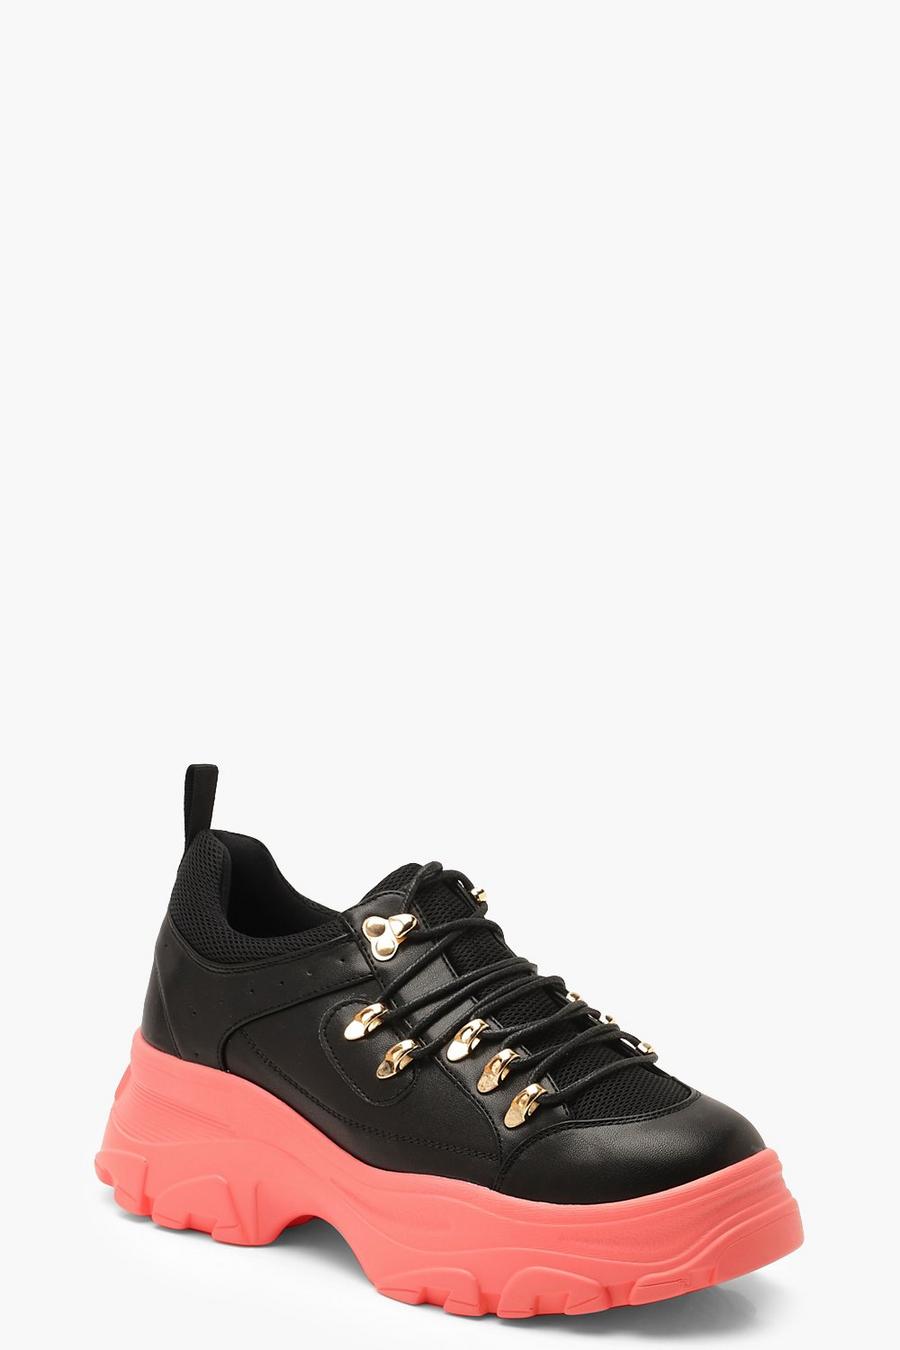 Contrast Sole Lace Up Chunky Hiker Trainers image number 1